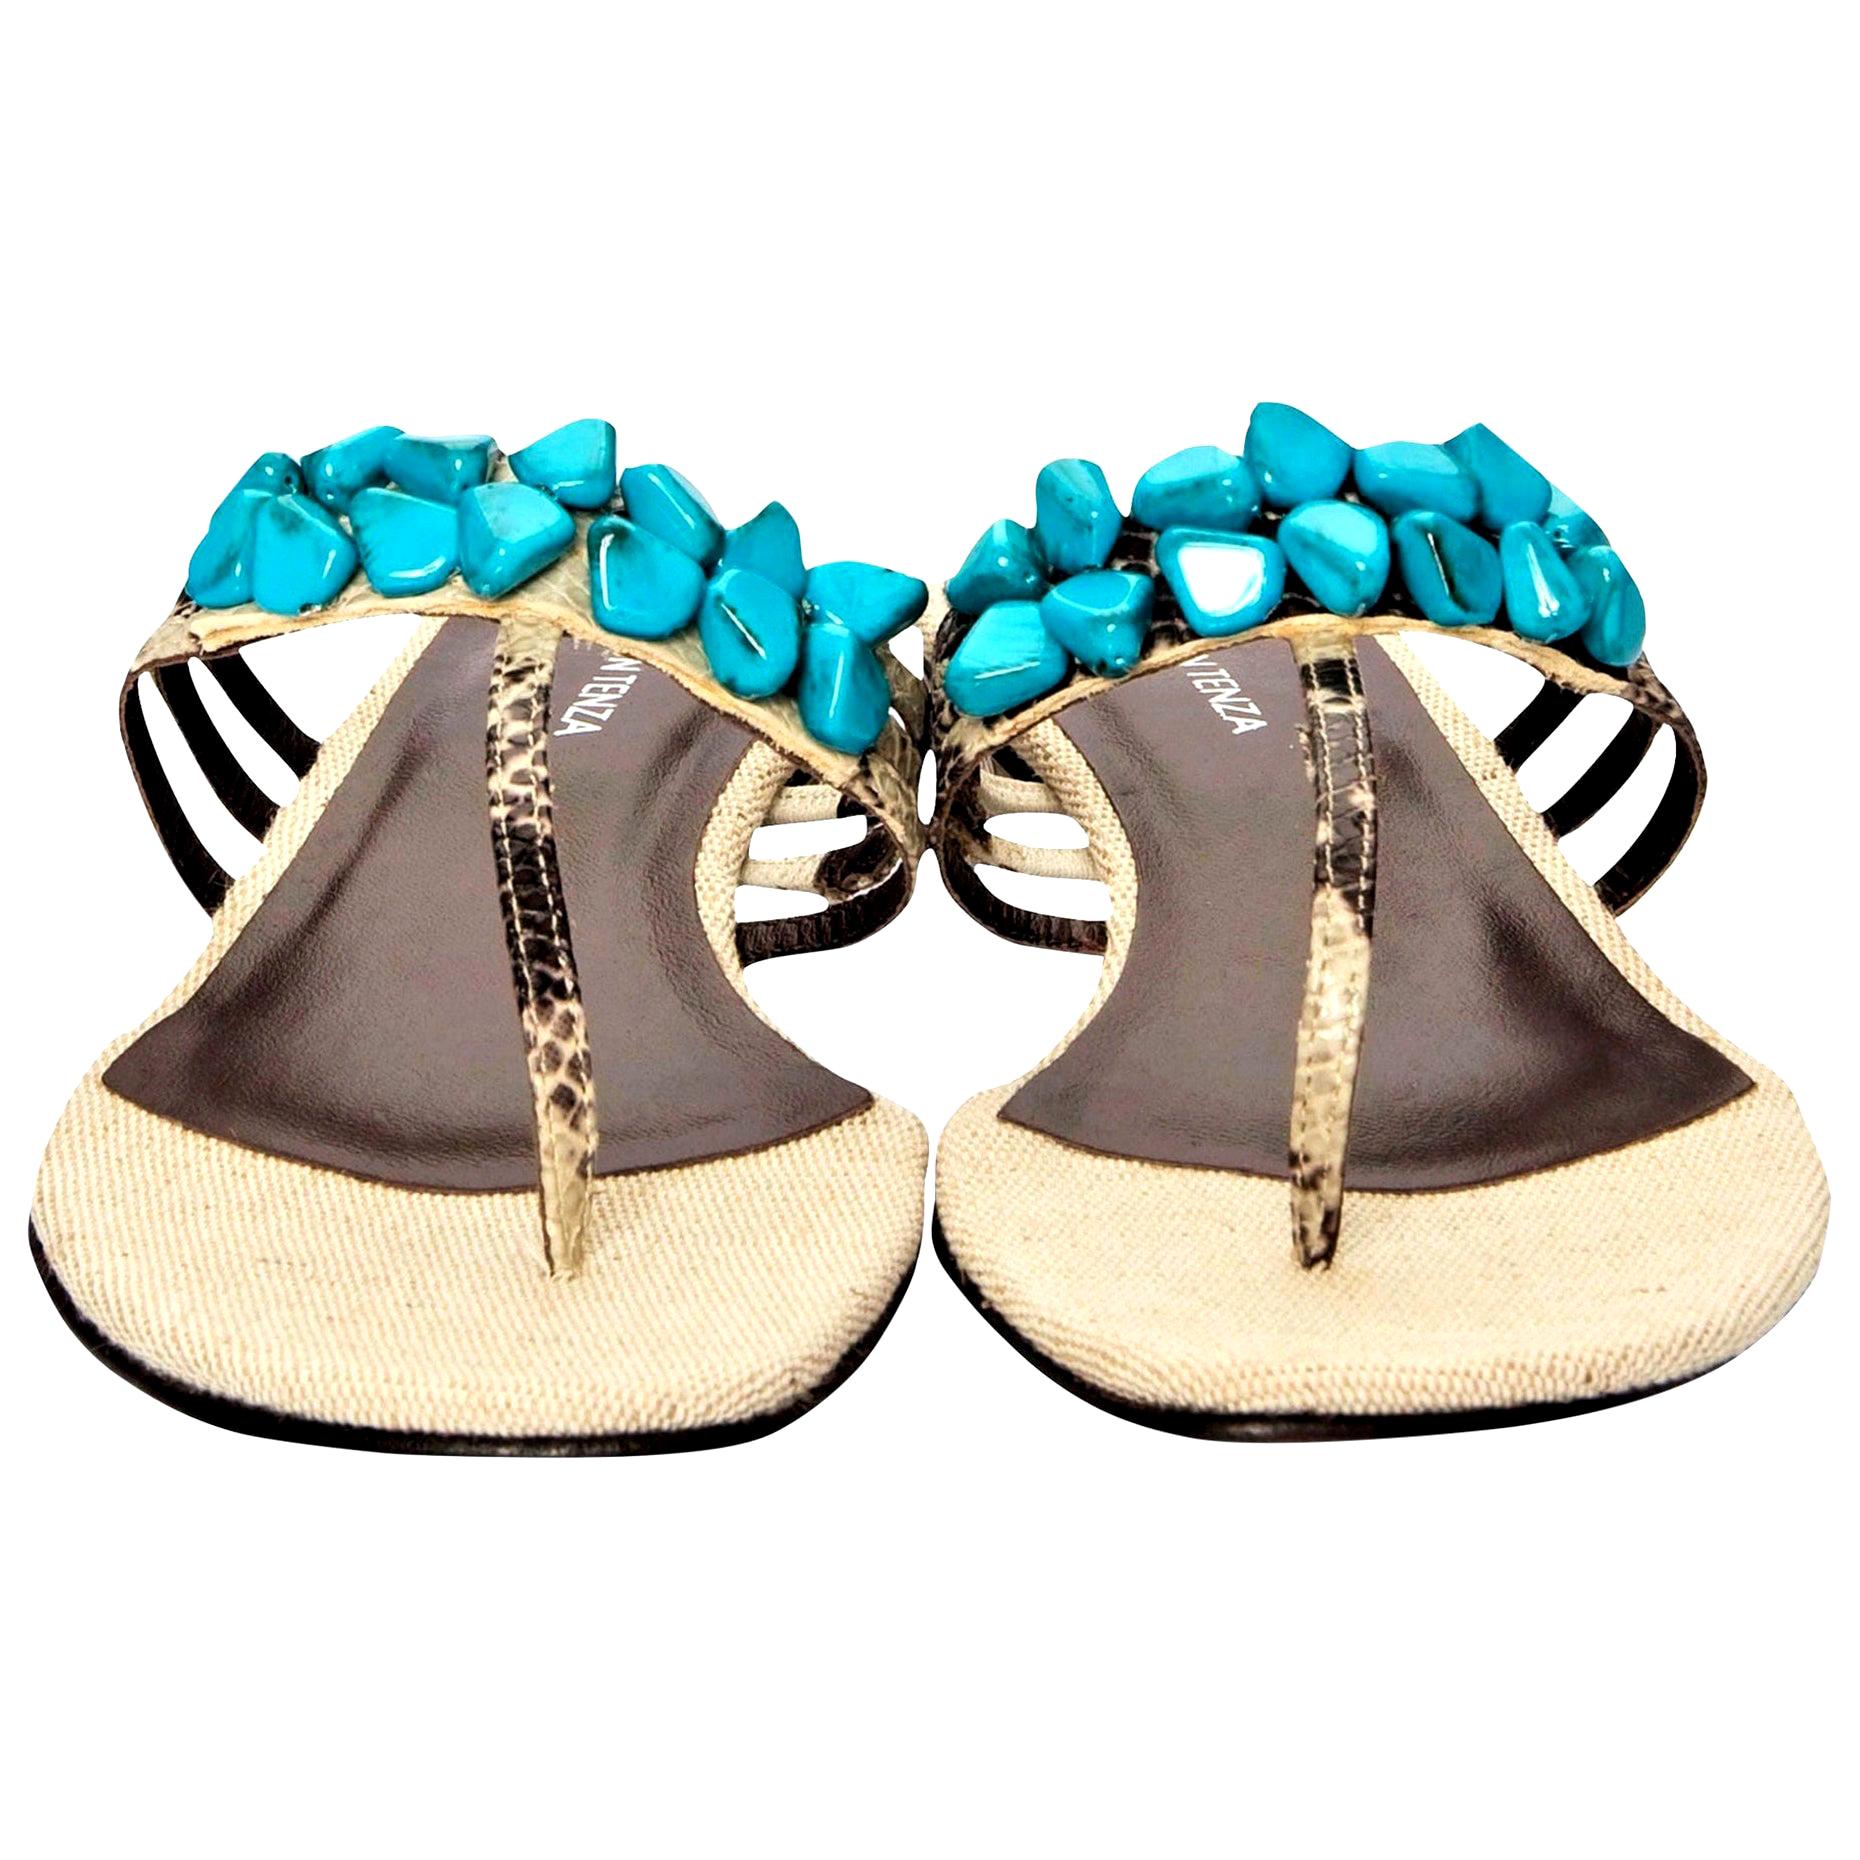 Ramon Tenza Spain
Brand New
Beige & Turquoise Thong Sandals
* Padded Leather Footbed
* Snakeskin Heel & Strap
* Faux Turquoise Beading
* Size: 10
* 1.25